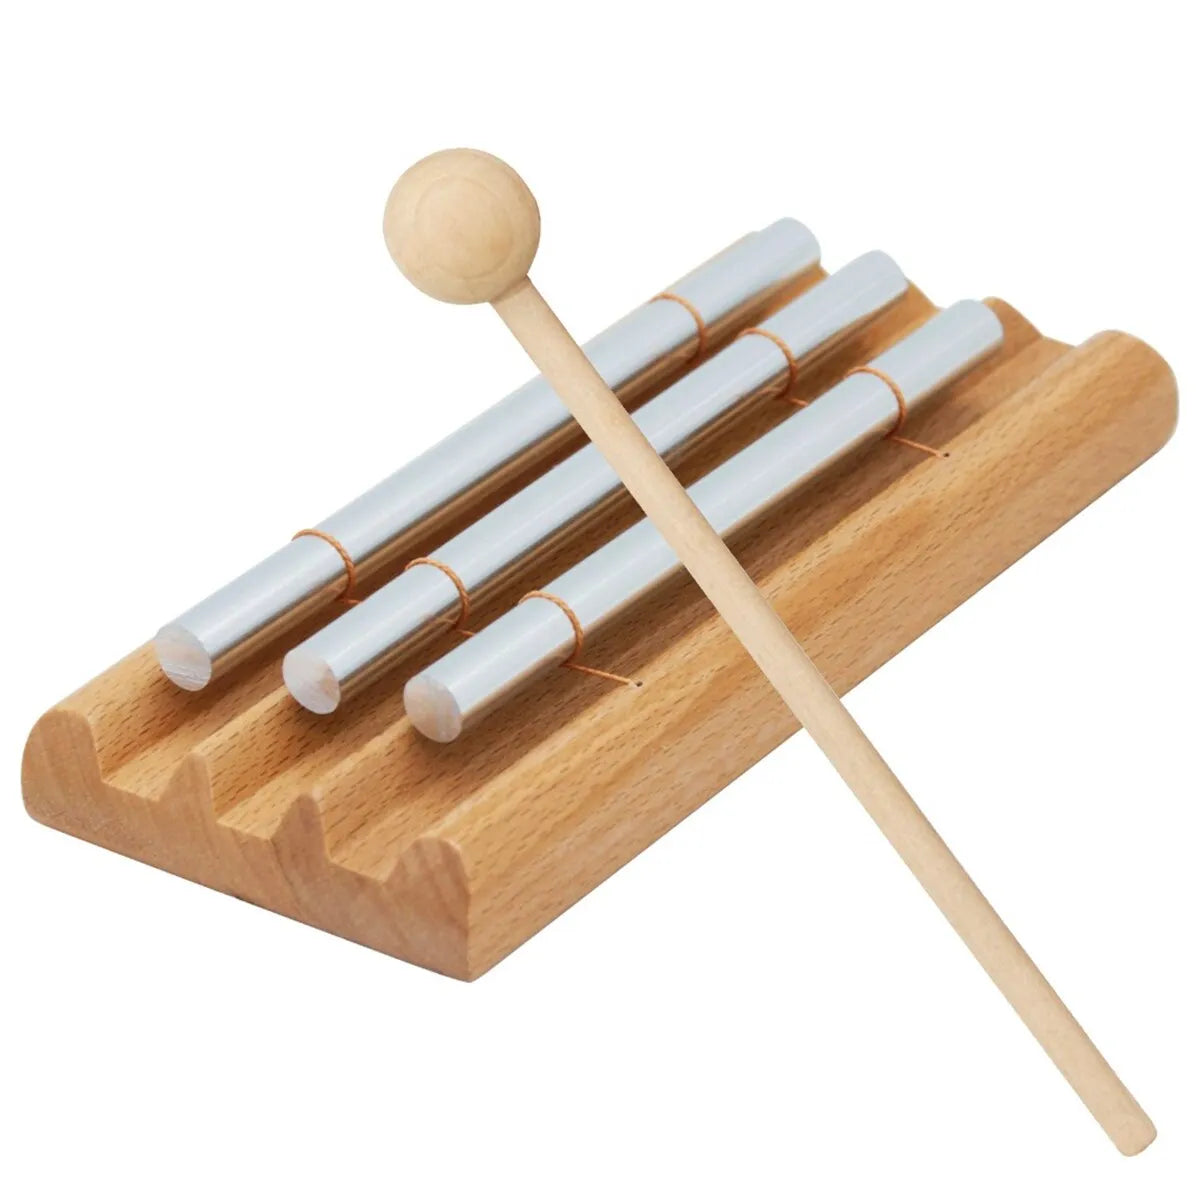 Meditation Chimes 3Phoneme The Original Guaranteed Musically Tuned Wind Zenergy Hand Chime for Classrooms Meditation Mindfulness